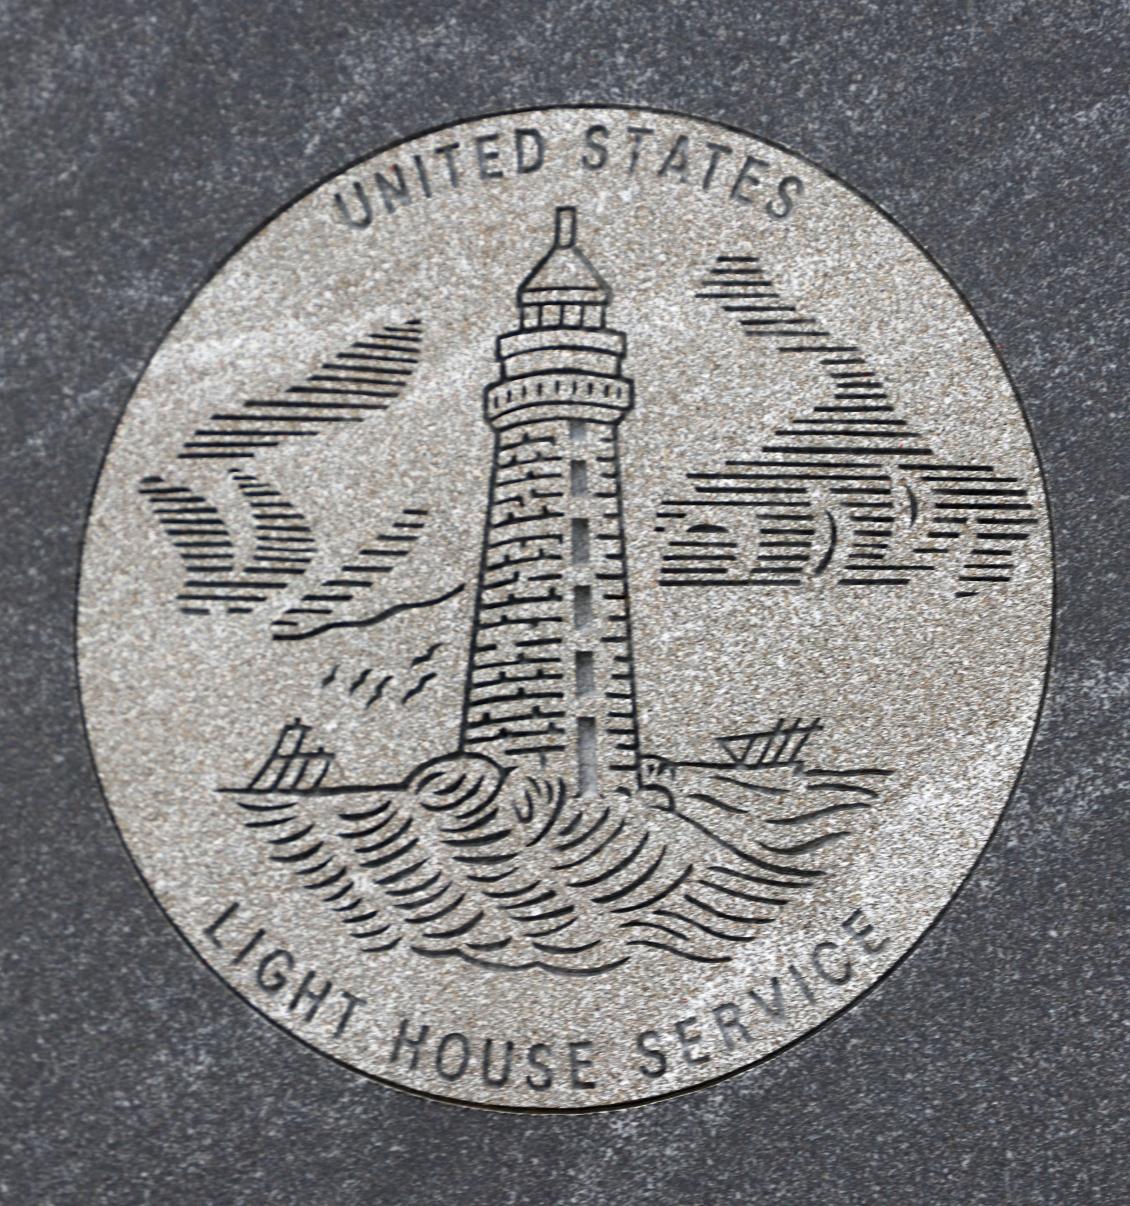 Cape May Training Center - Eternal Flame Coast Guard Services Monument - Lighthouse Service